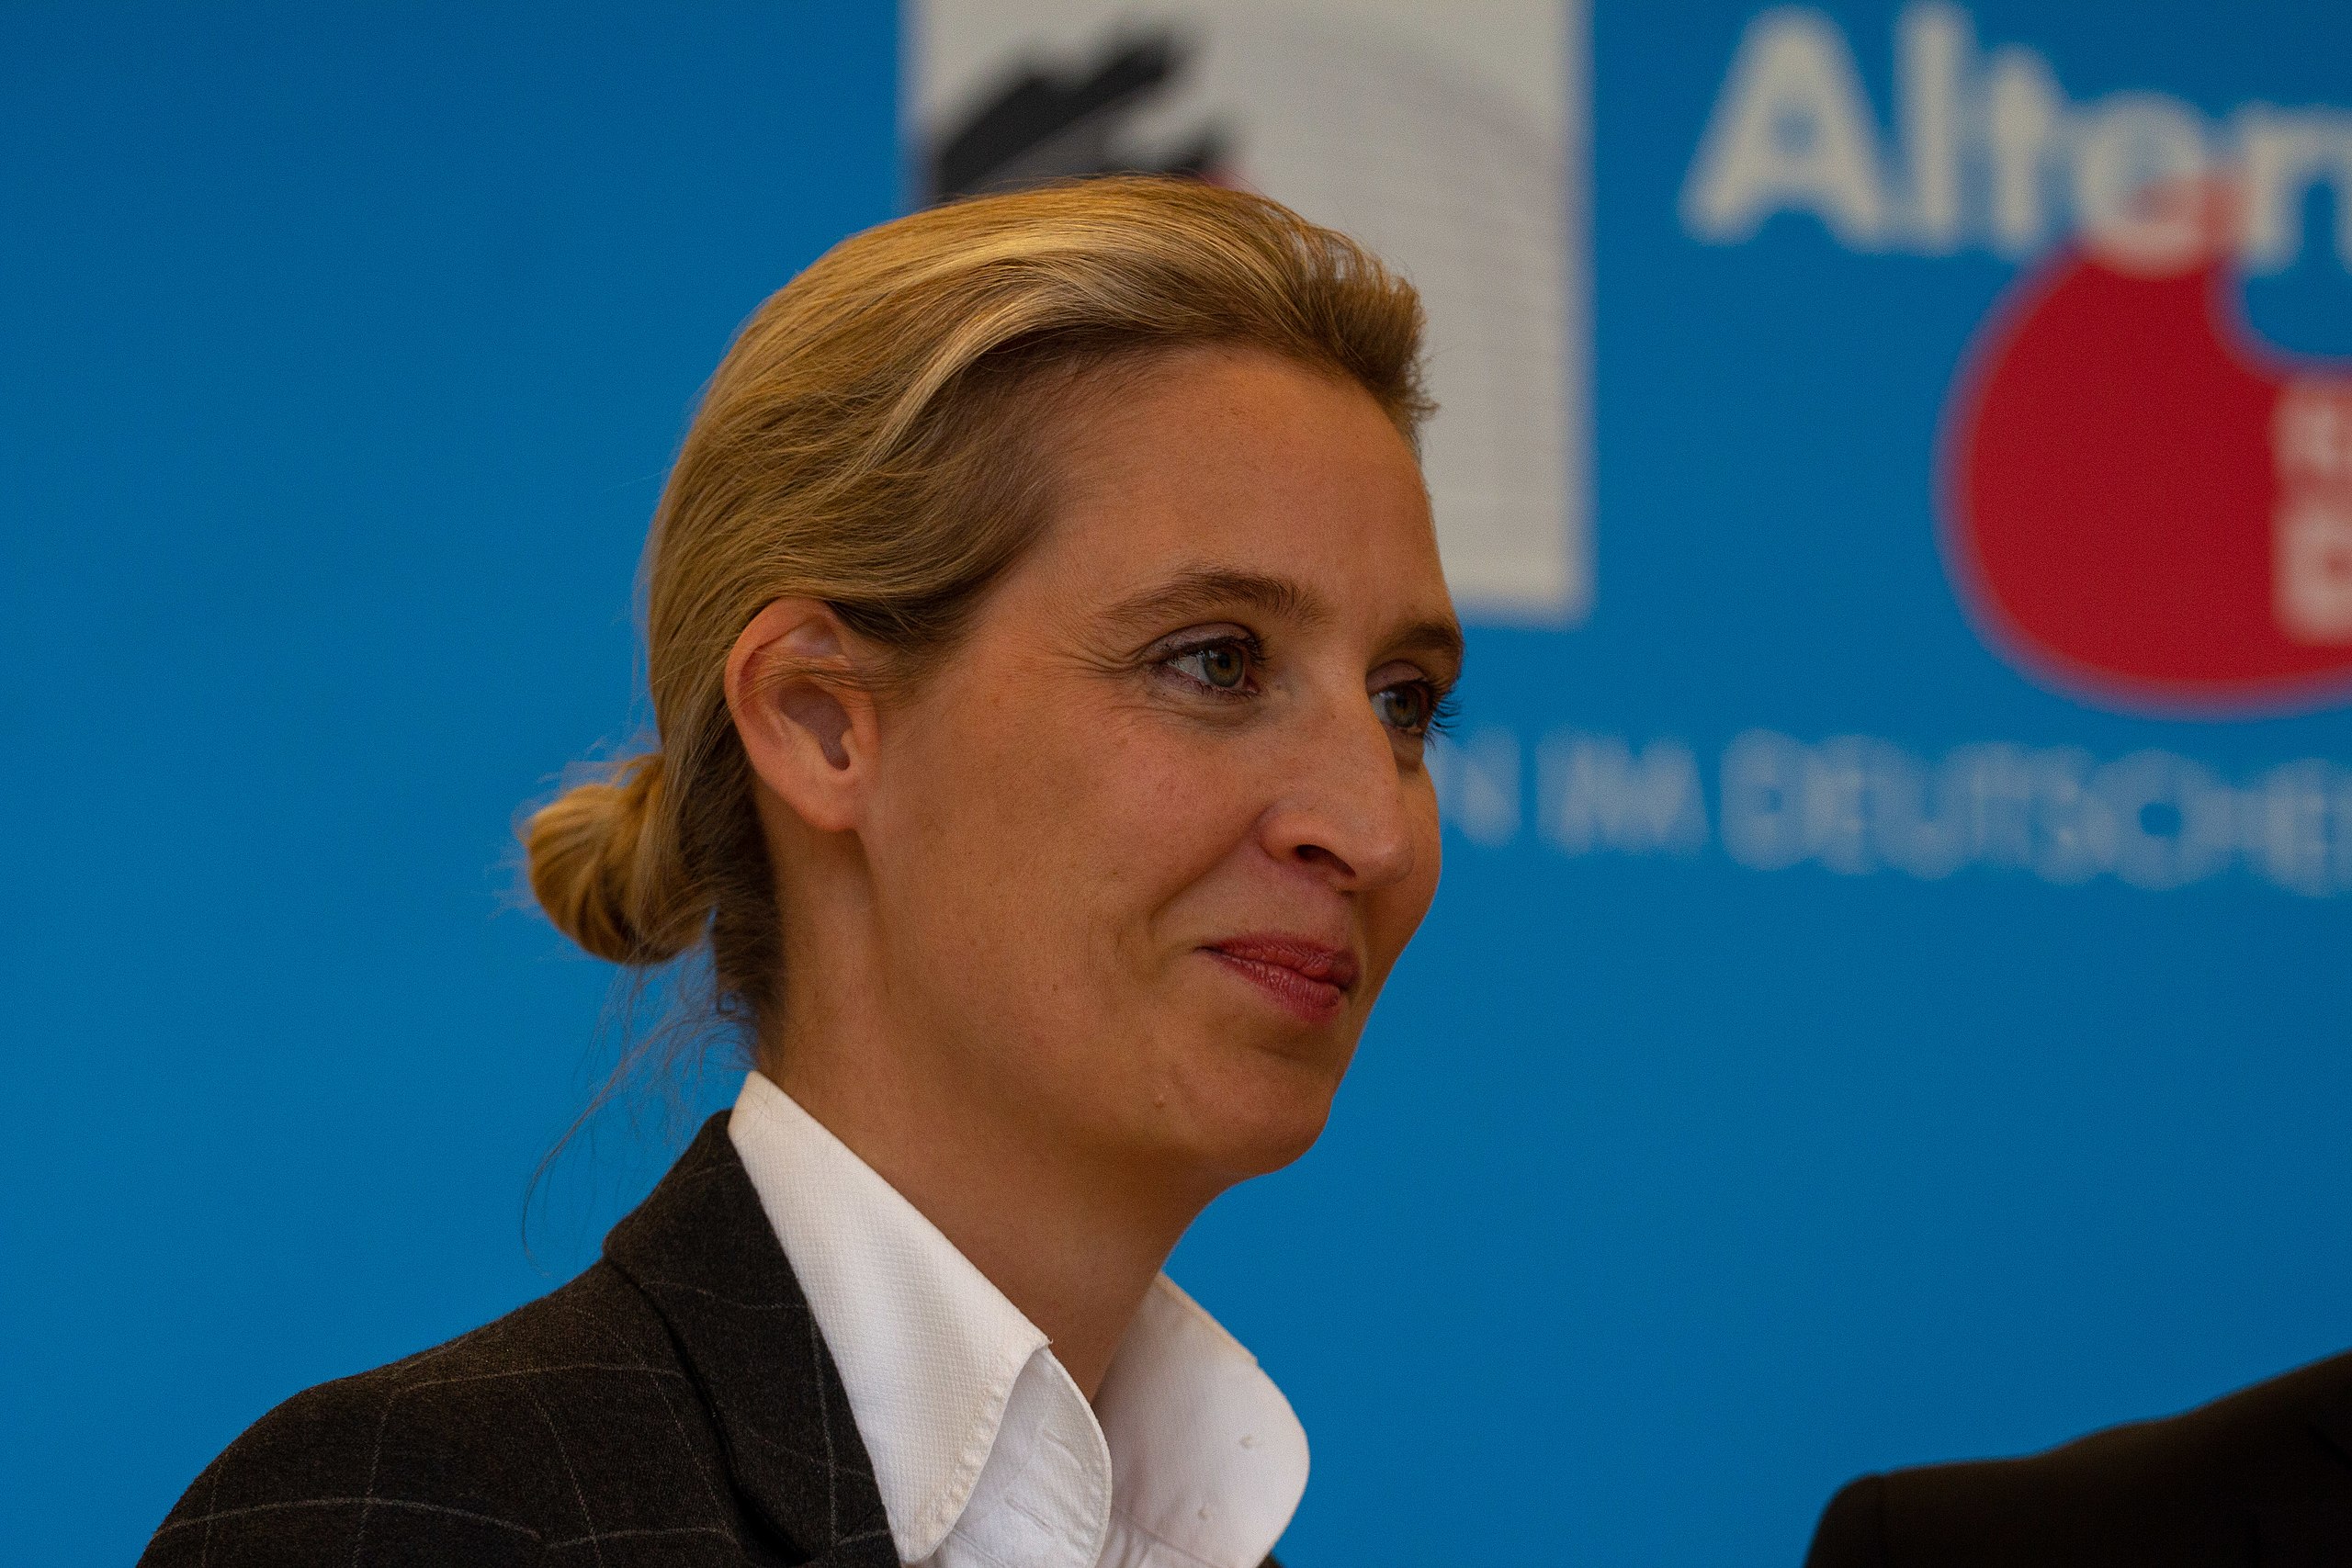 Alice Weidel, co-chair of Alternative for Germany